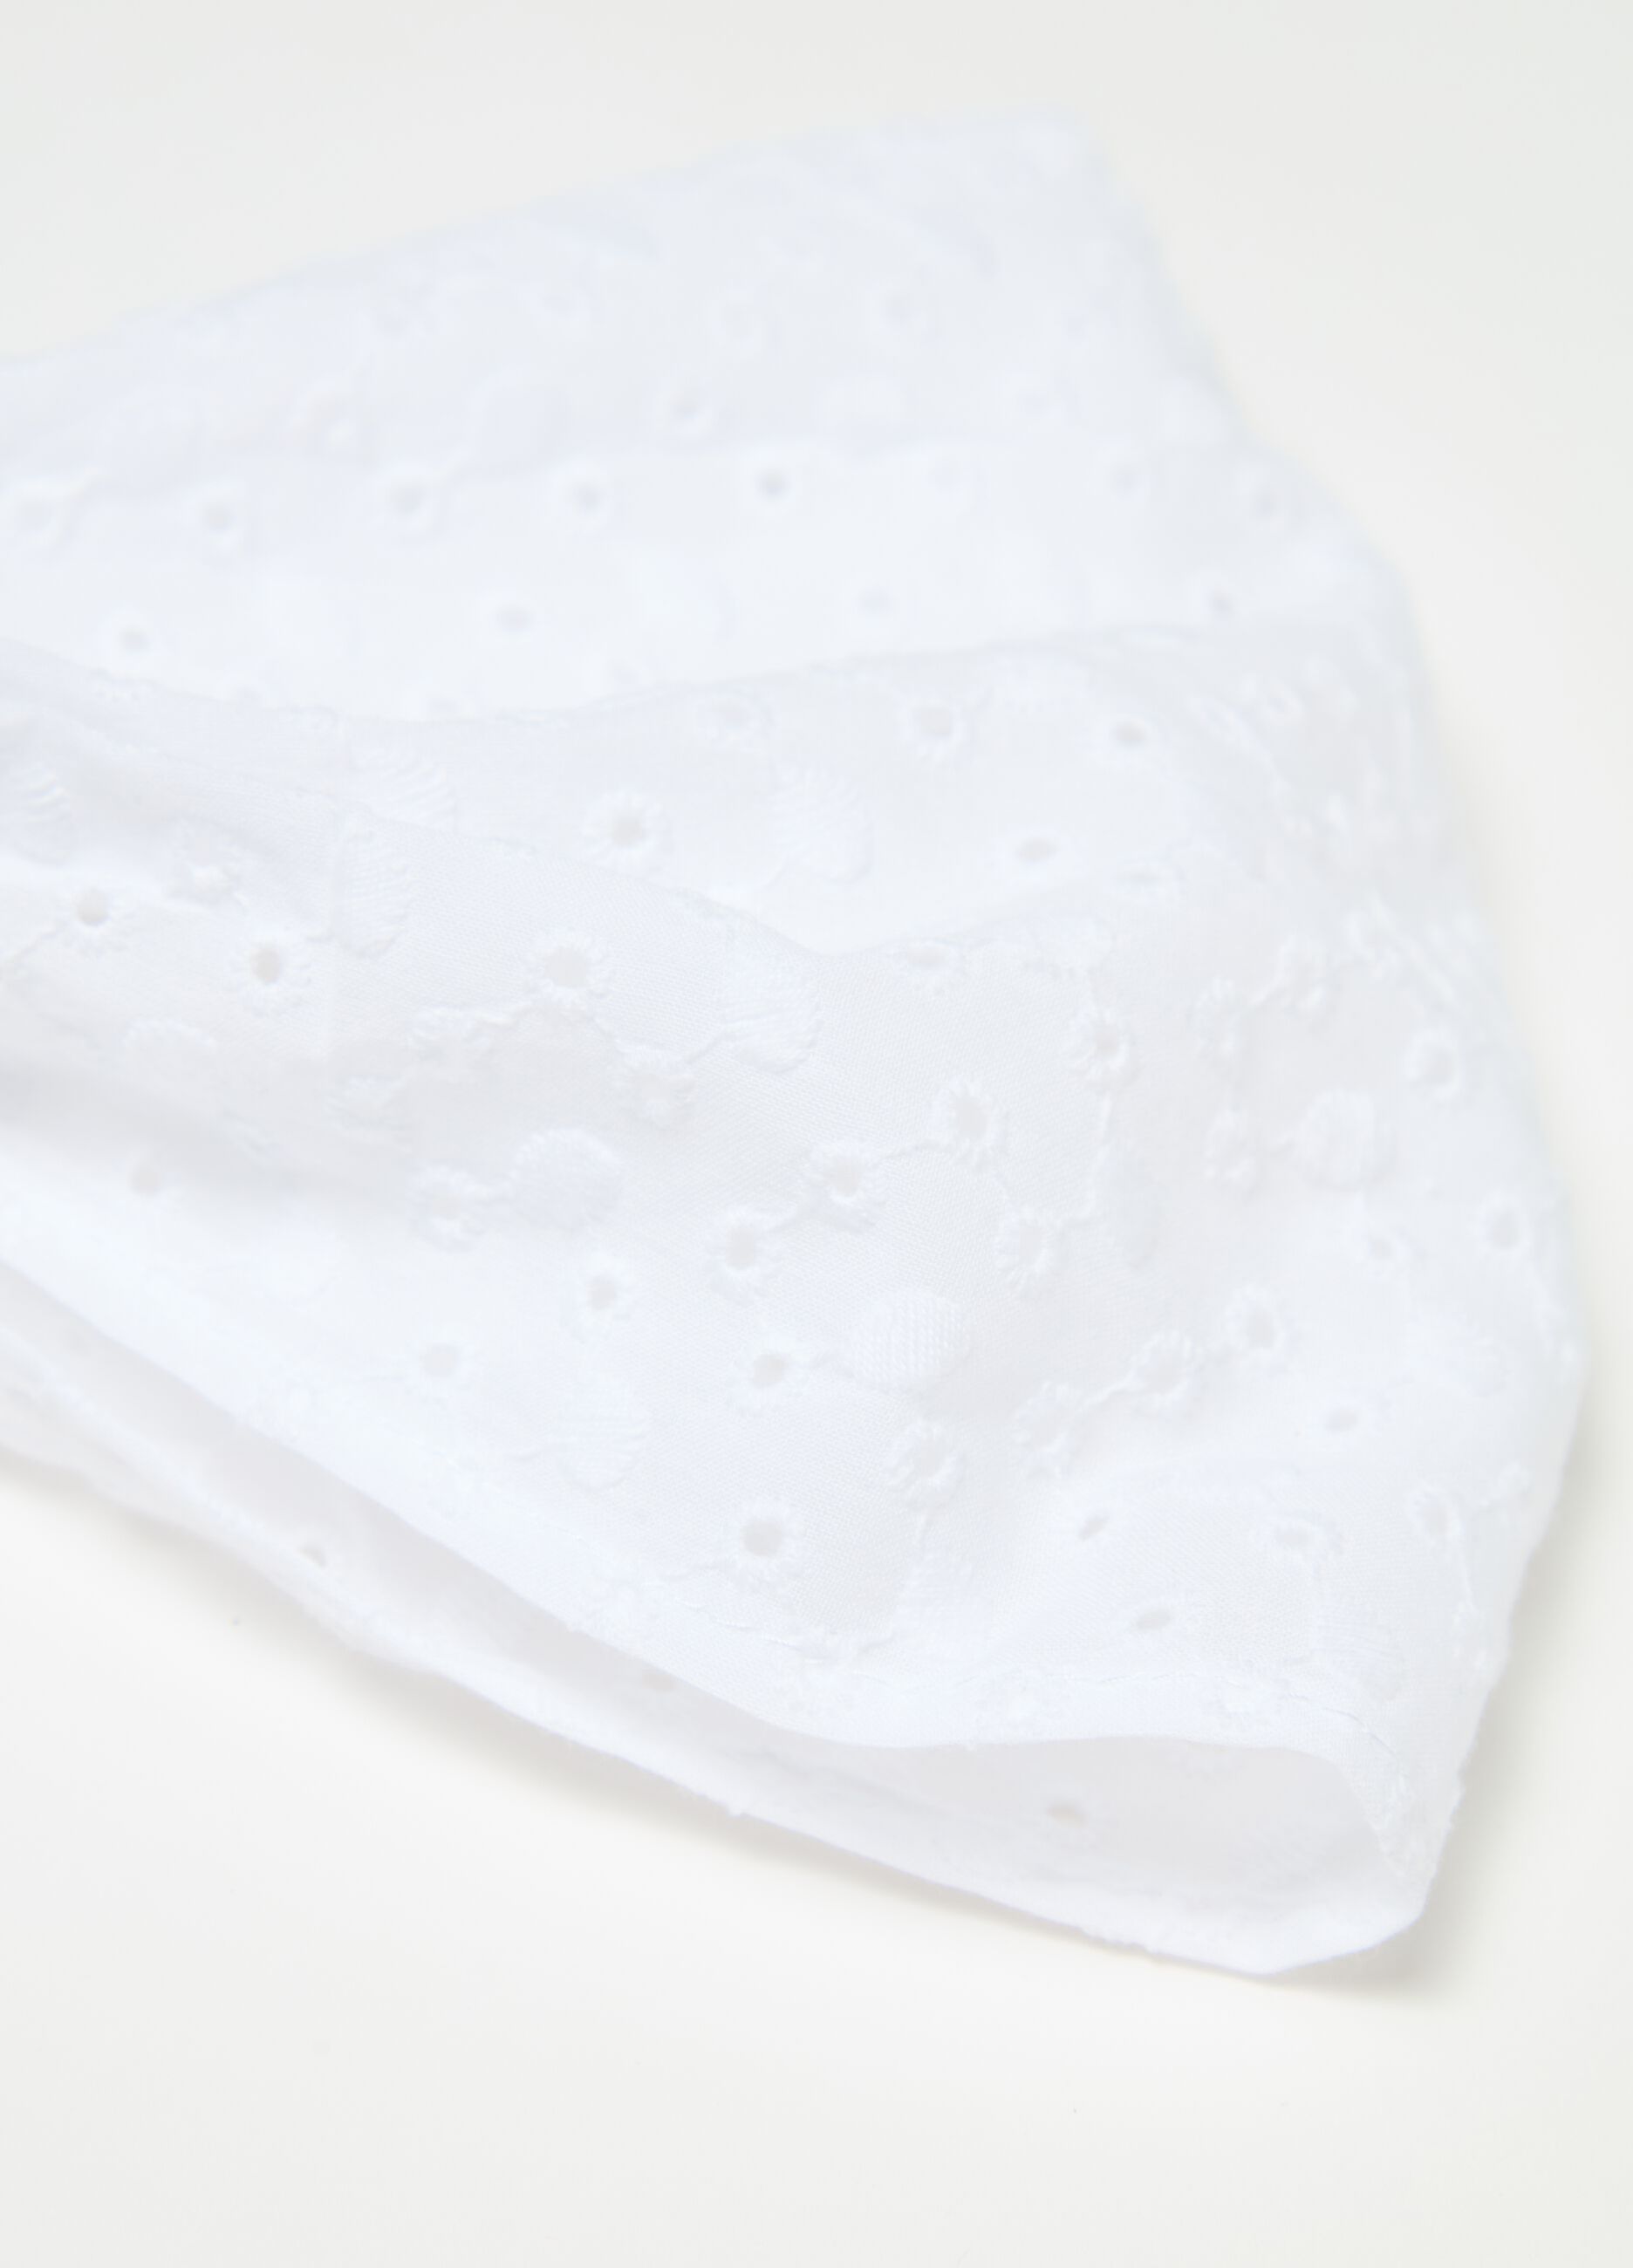 Bandana in broderie anglaise cotton